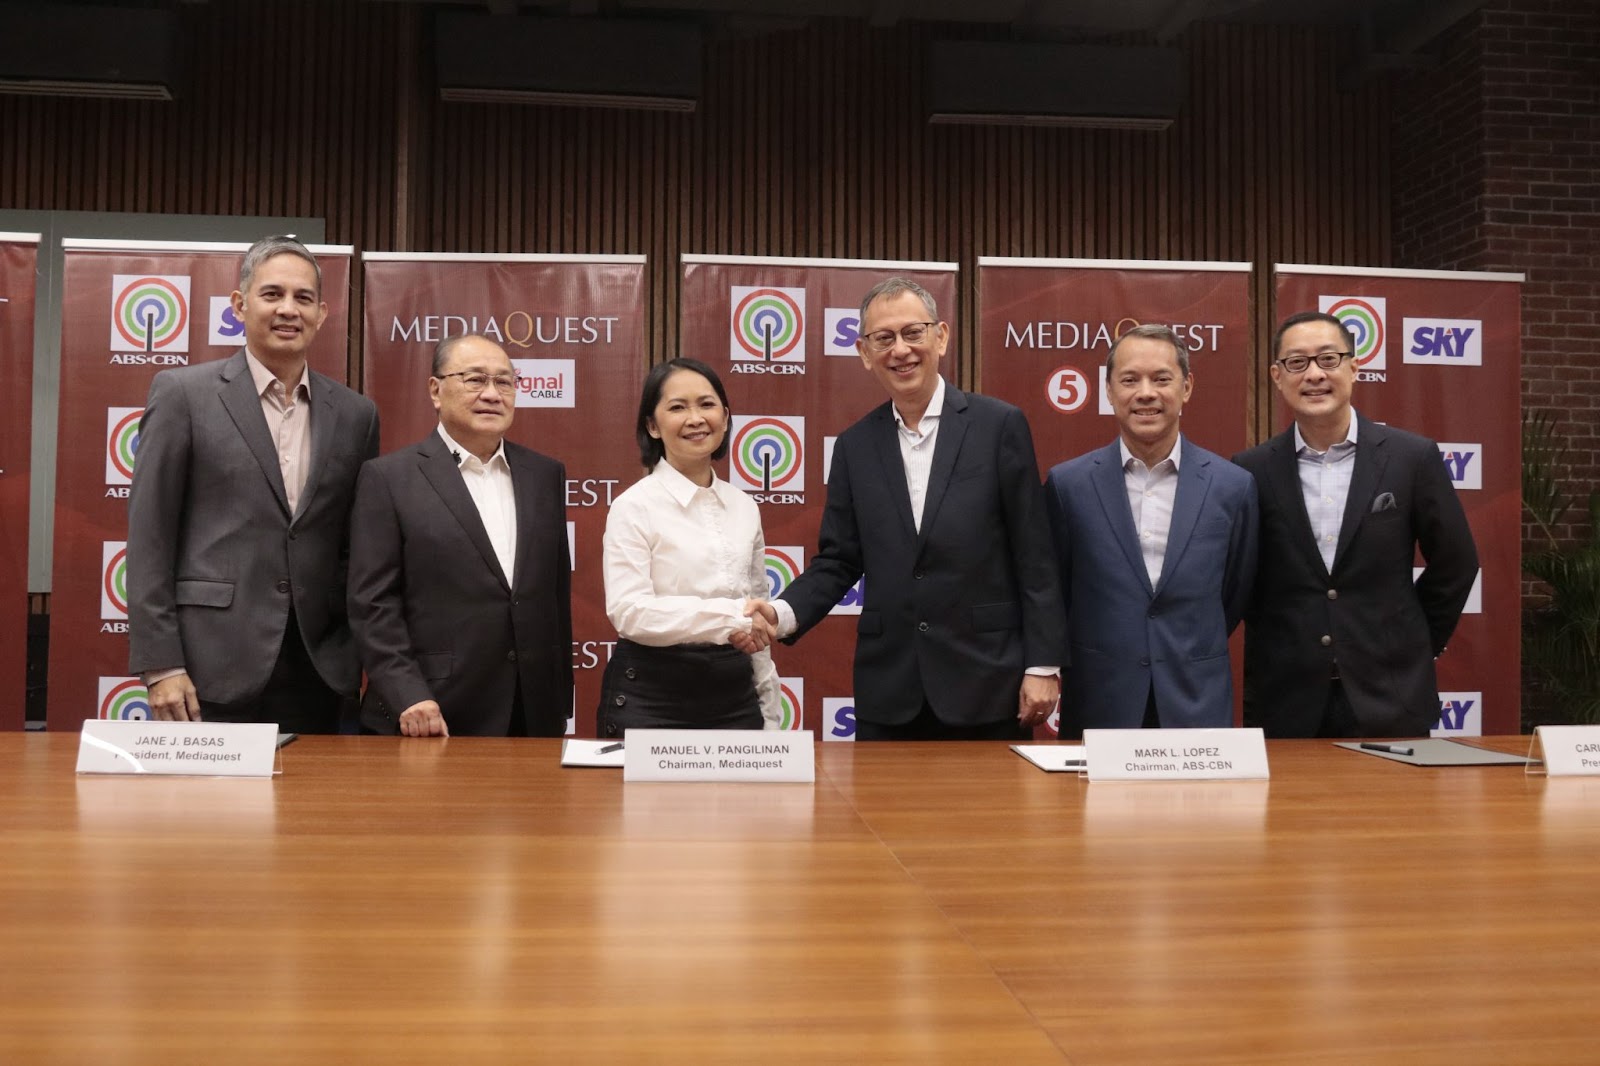 Cignal Cable Acquires 38.88% of Sky Cable for Php 2.86 B; marks new chapter in Pay TV. Present in the signing are (L-R) Smart & PLDT President & CEO Alfredo S. Panlilio, Mediaquest Holdings Chairman Manuel V. Pangilinan, Mediaquest Holdings President & CEO Jane J. Basas, Sky Cable Corp President & CEO Antonio S. Ventosa, ABS-CBN Chairman Mark L. Lopez and ABS-CBN President & CEO Carlo L. Katigbak